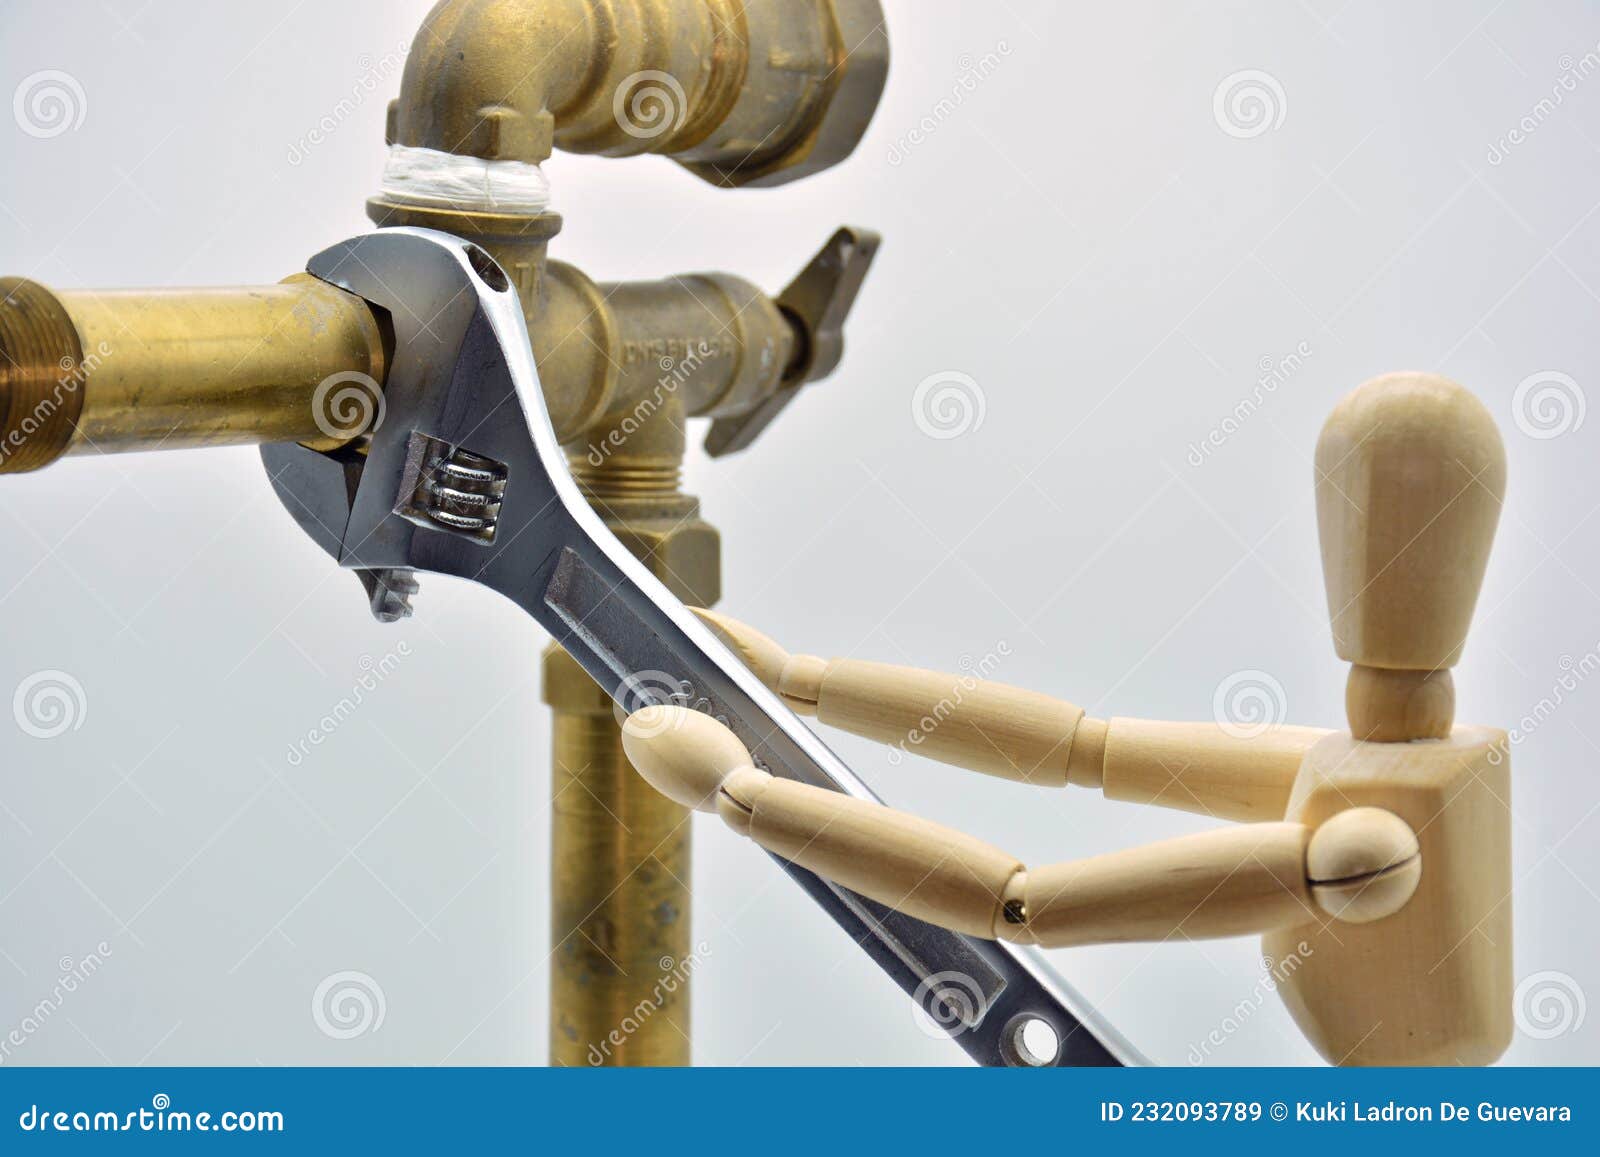 wooden mannequin with an adjustable wrench